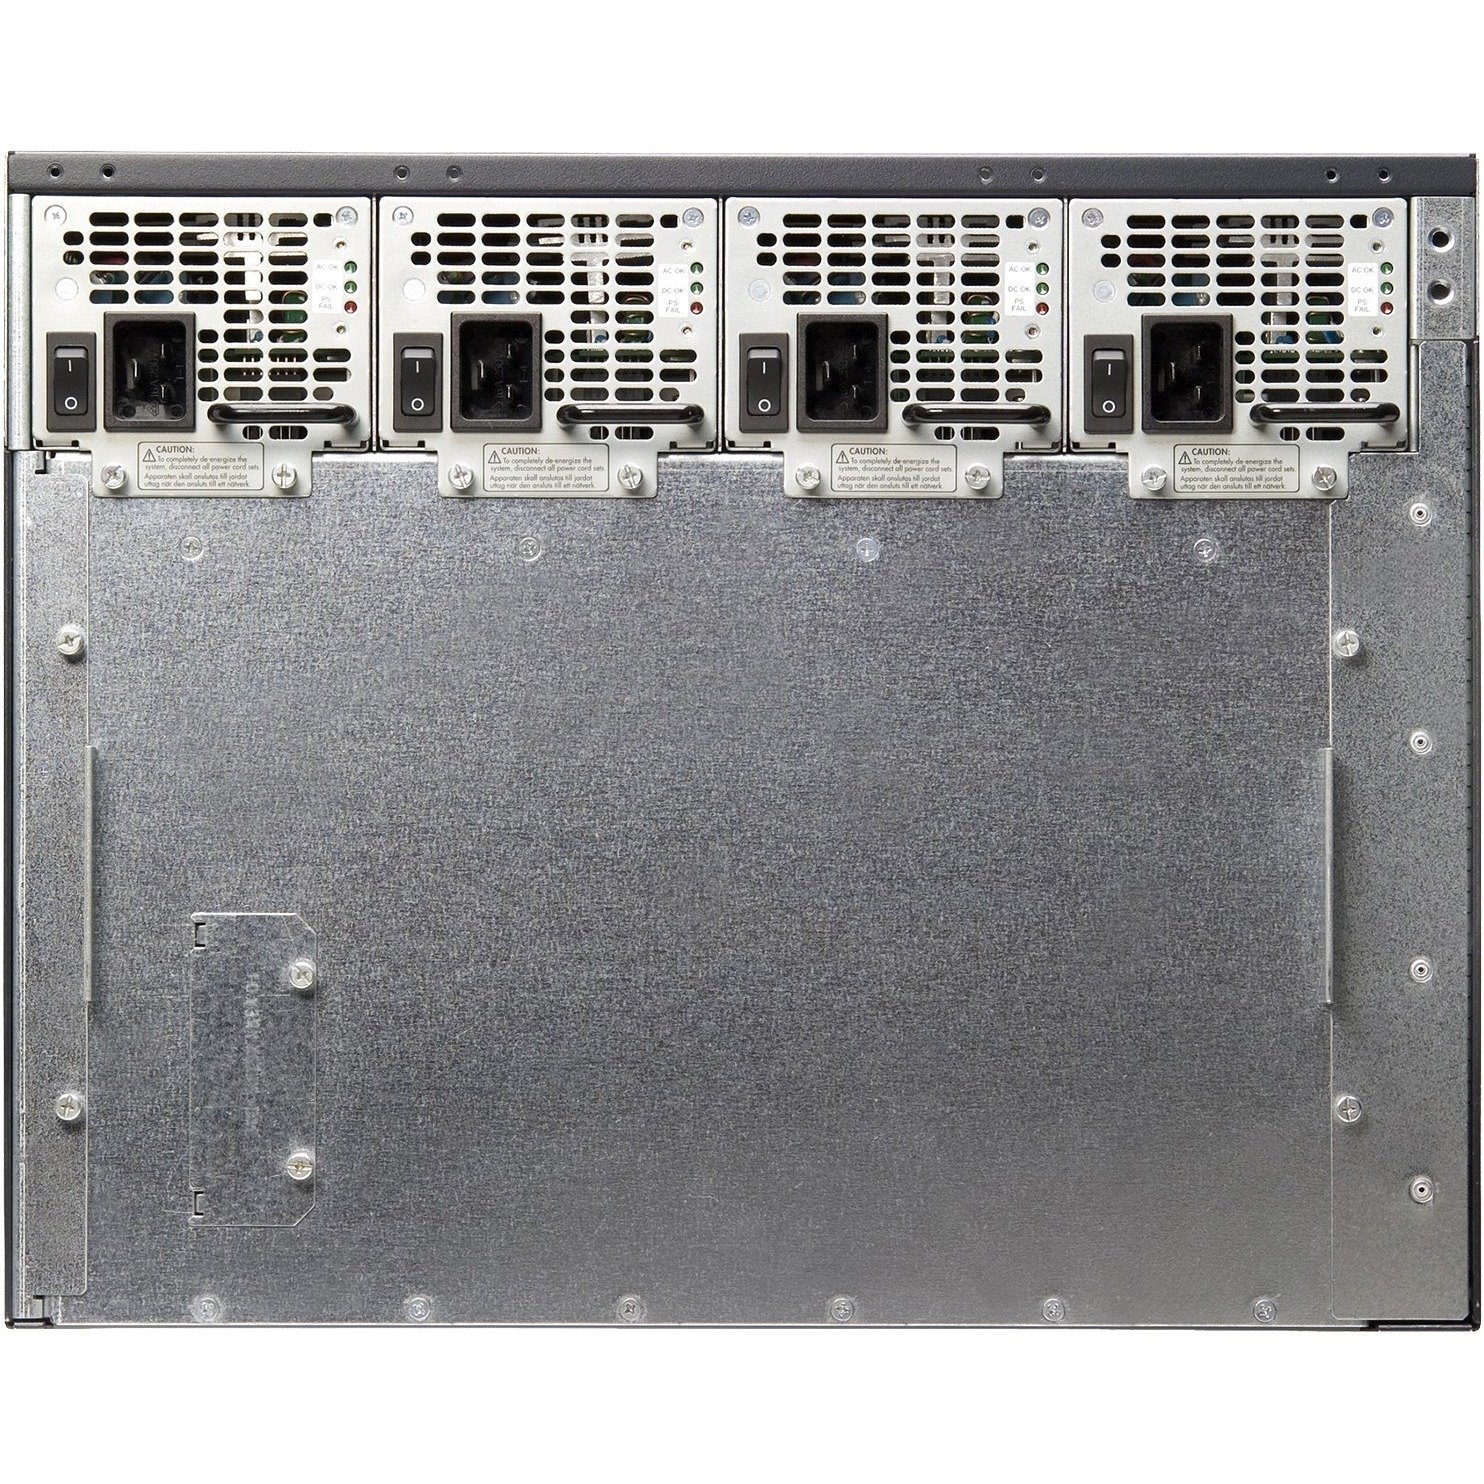 Juniper MX MX480 Router Chassis